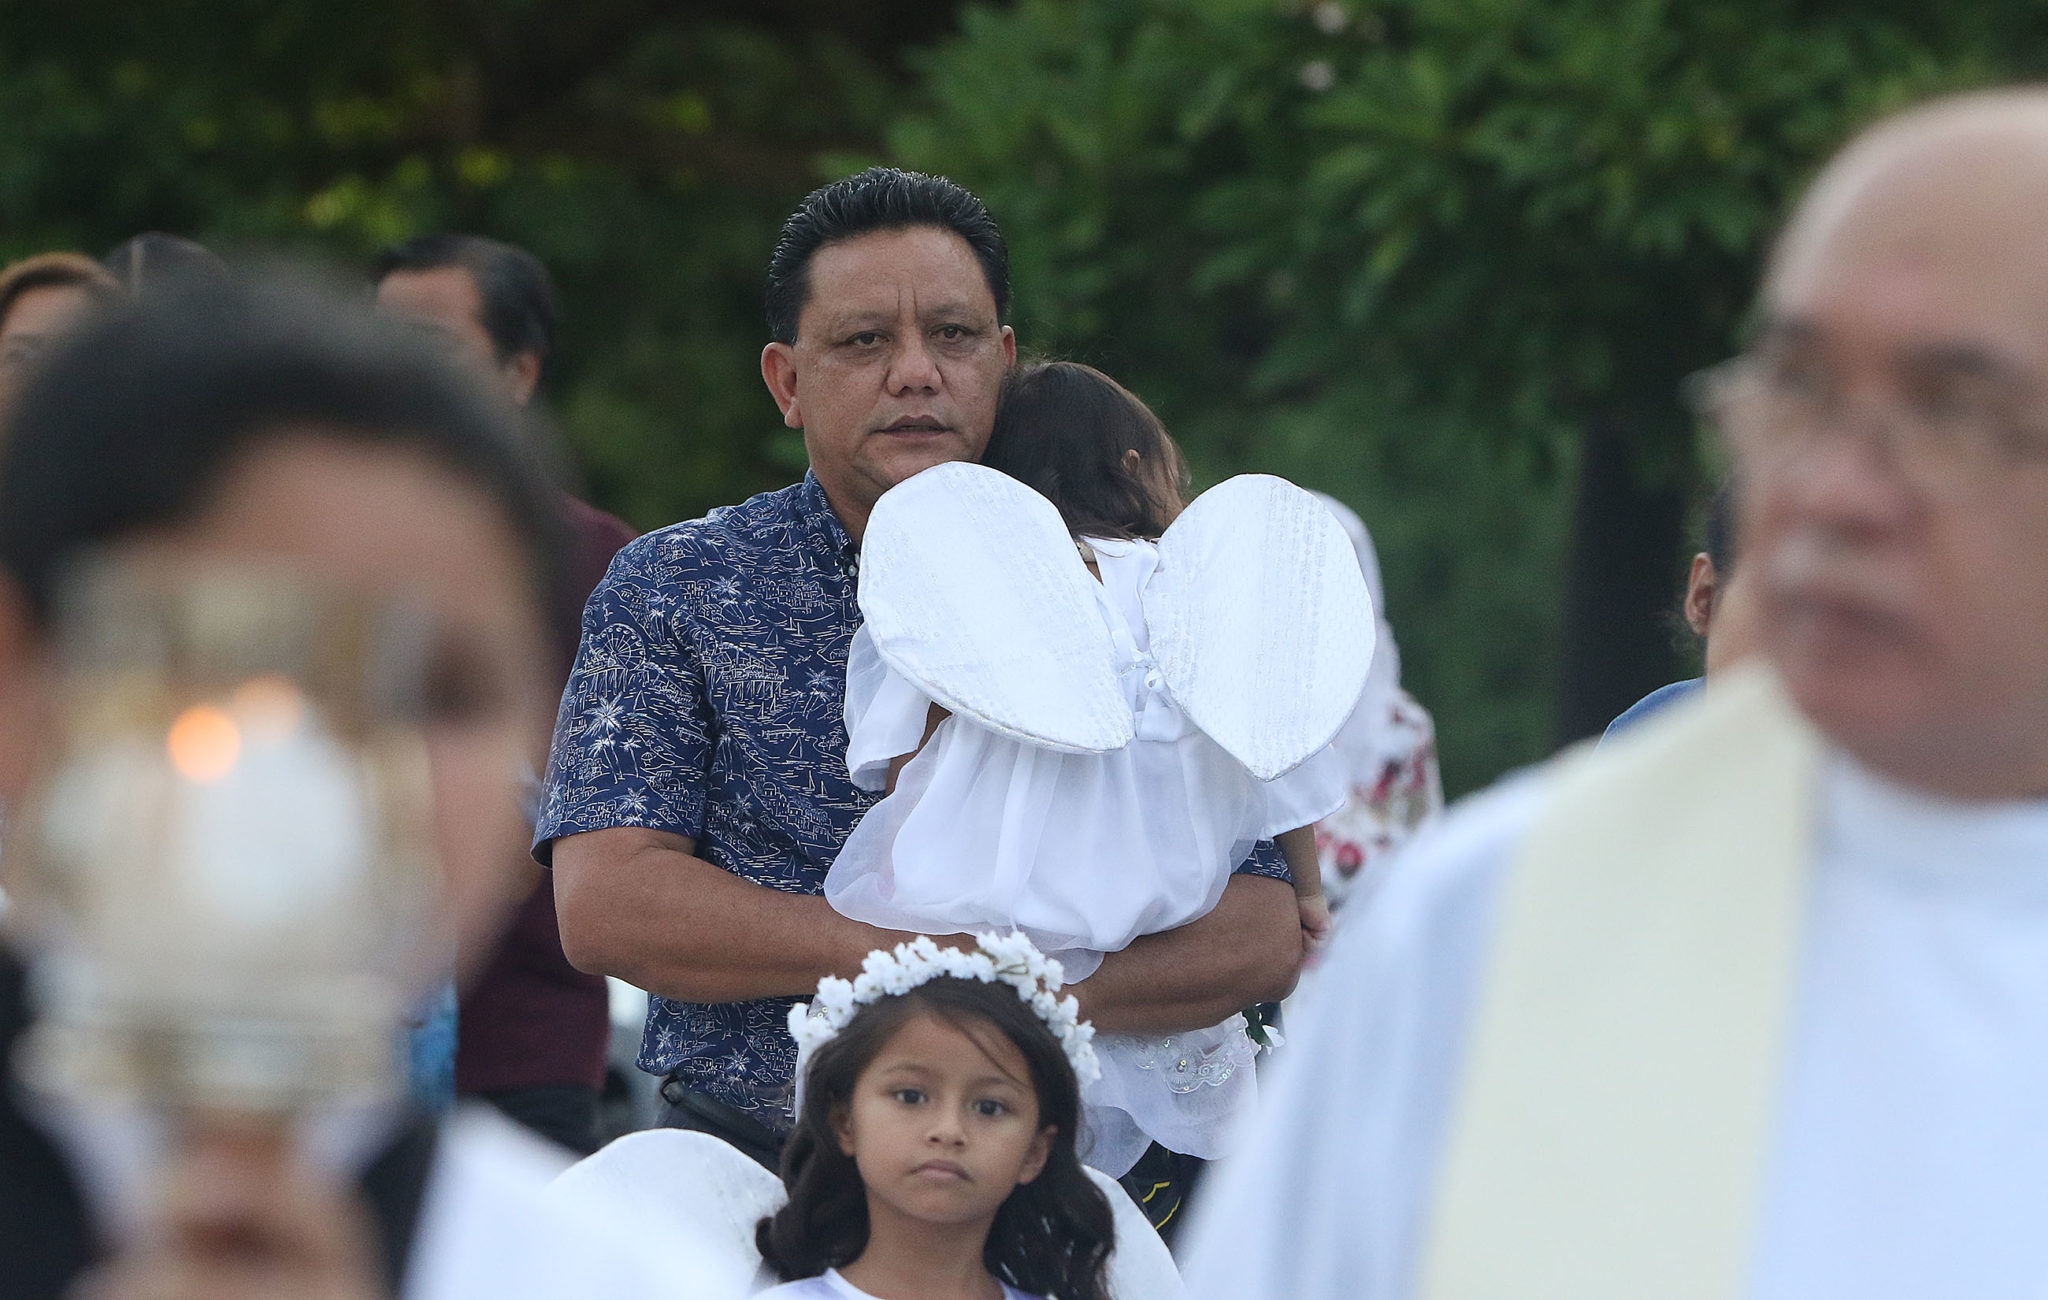 Roland Sandia carries his grand daughter in the procession held at Assumption of Our Lady Biba Santa Maria fiesta. Sandia alleges Archbishop Apuron sexually abused he and other altar servers